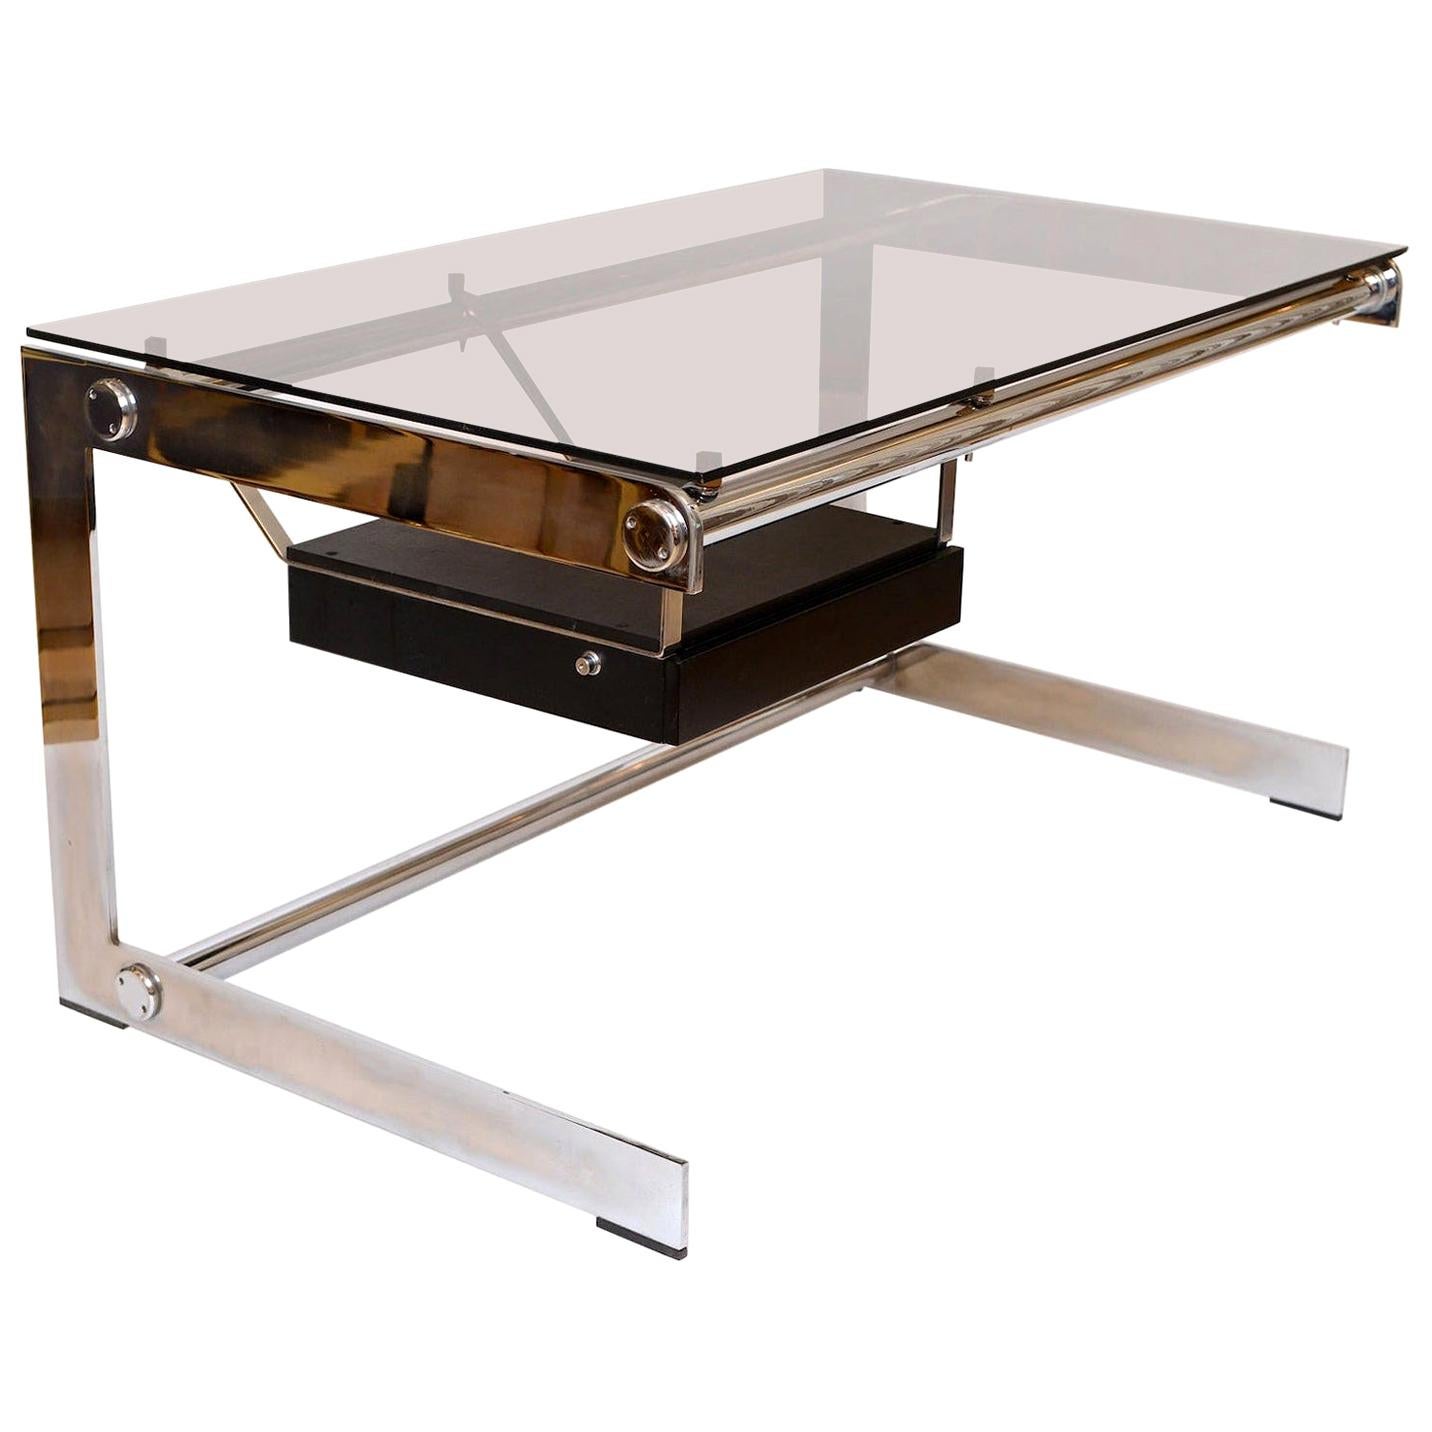 Rare Chrome and Glass Desk by Gilles Bouchez for Airbourne, circa 1965